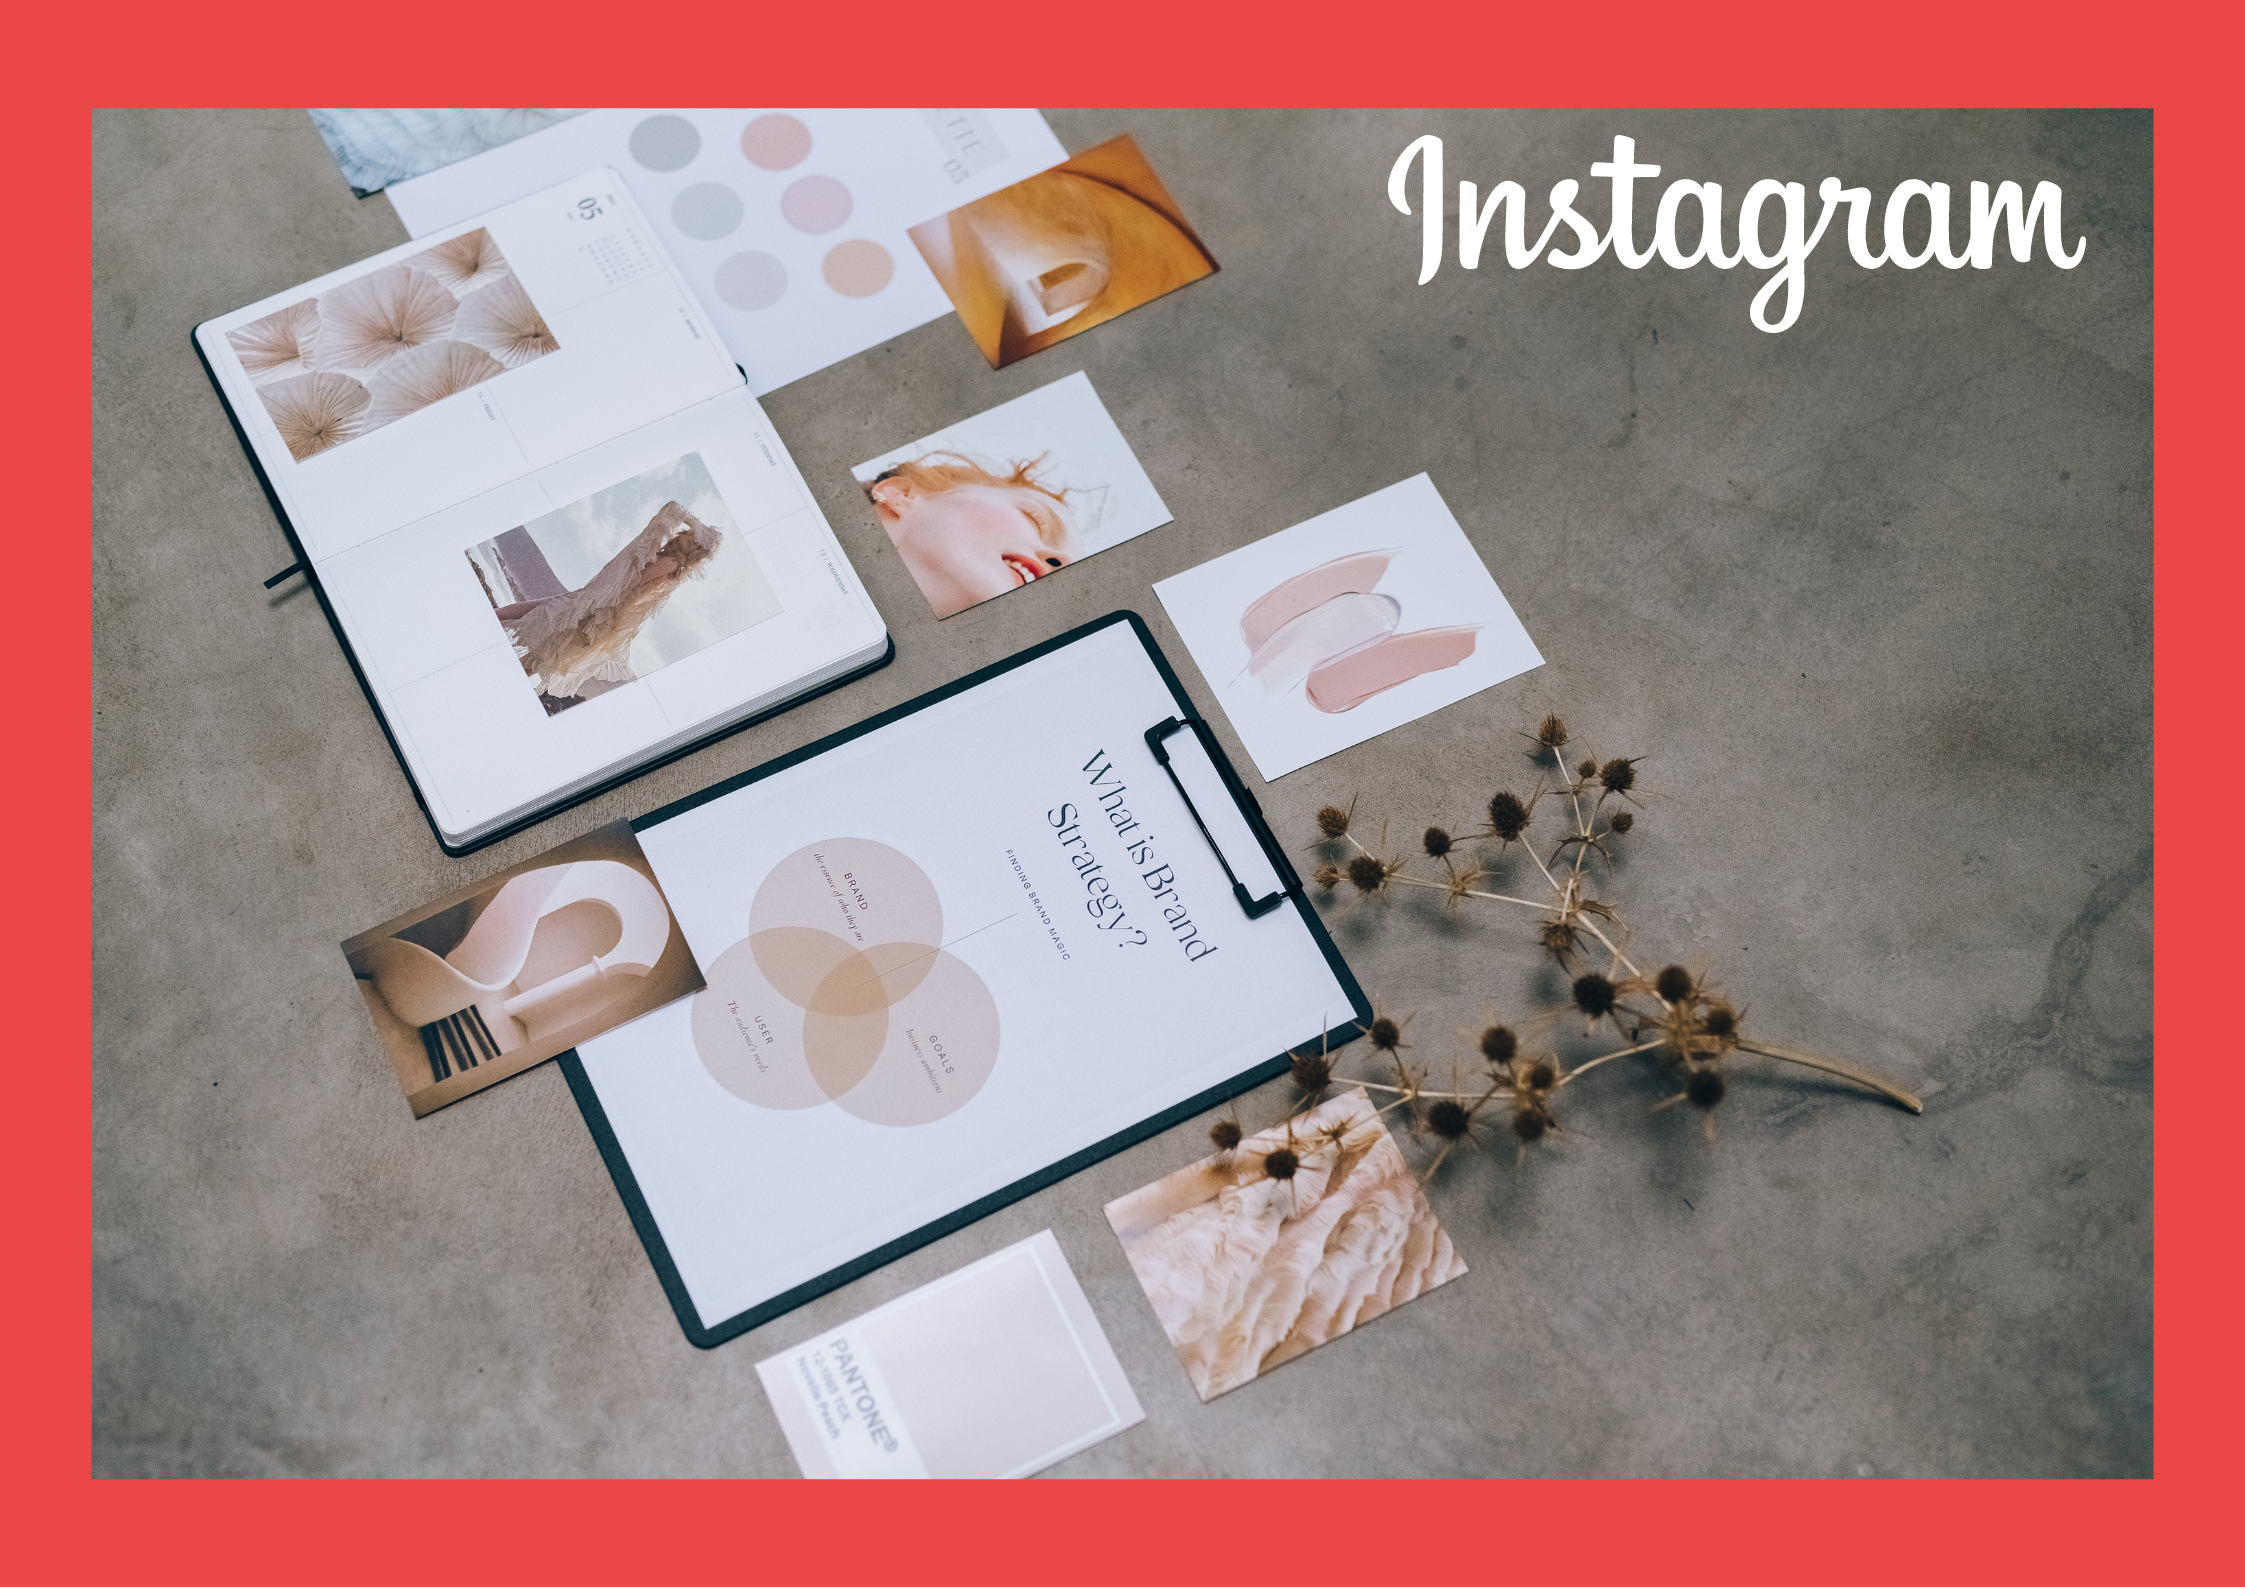 How to build up your Brand on Instagram